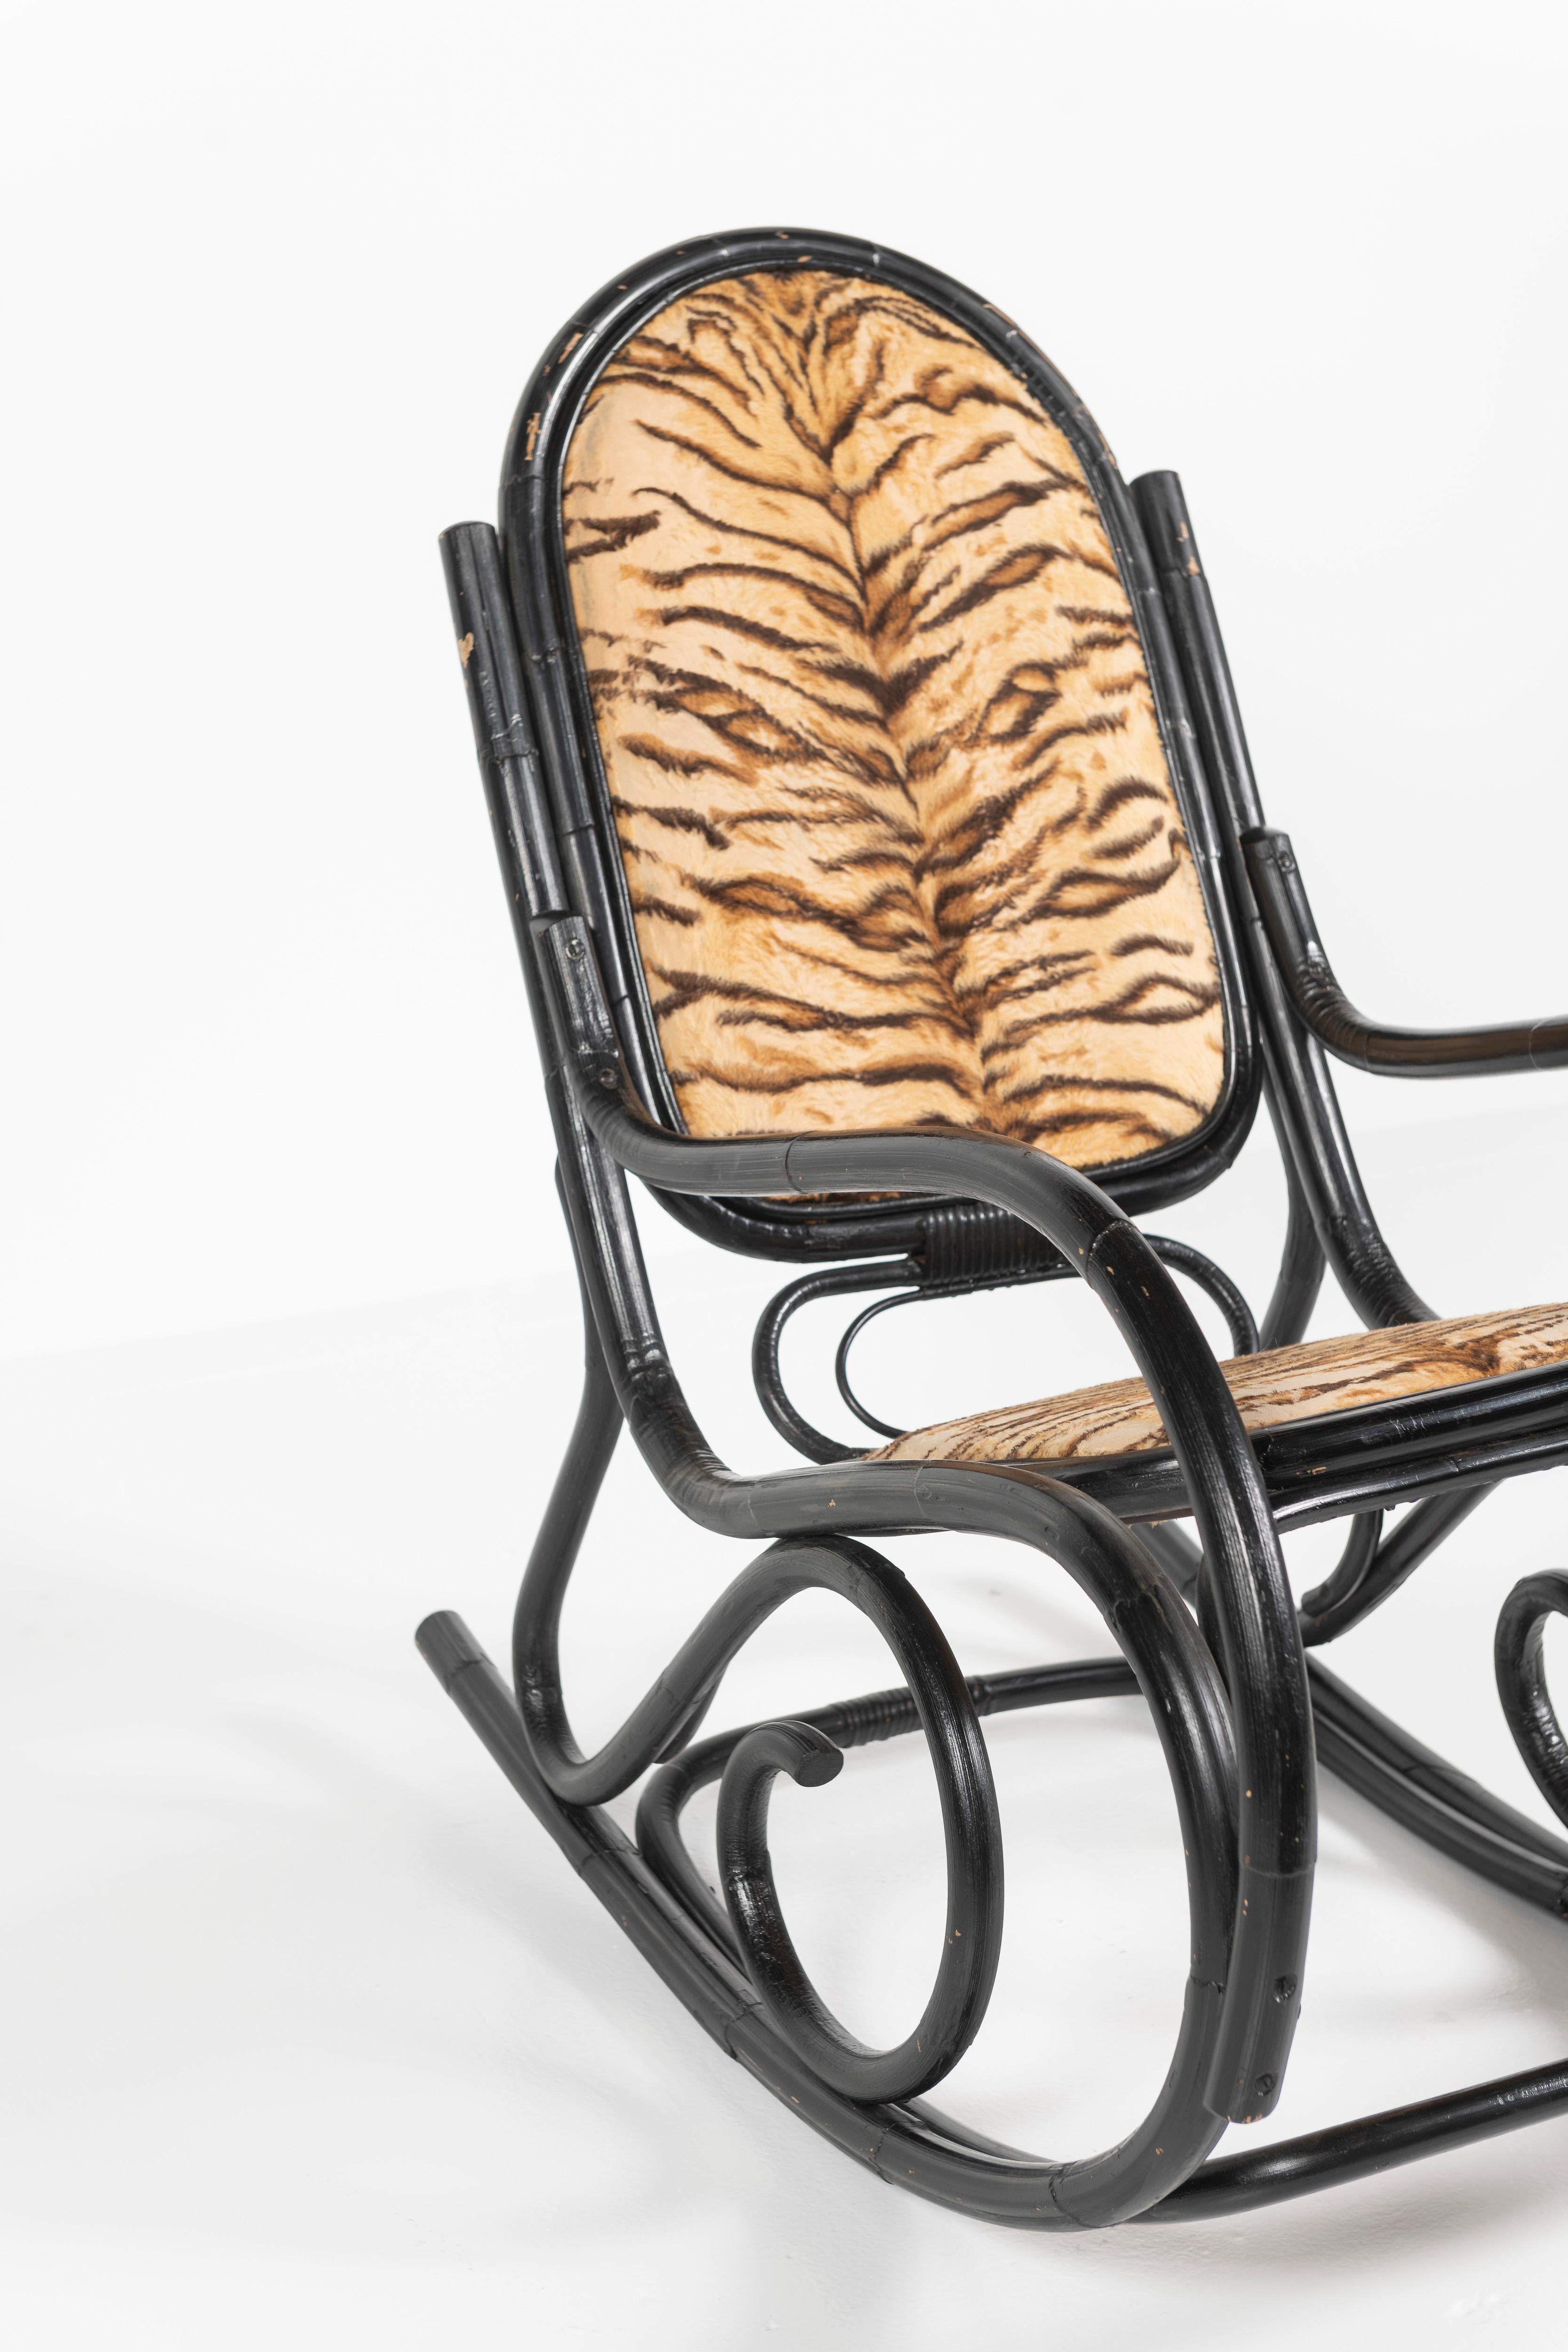 This classic bentwood rocking chair. made of lacquered black bamboo, is attributed to Thonet from the 1920s. The seat interior and back have been upholstered in a tiger print fabric, likely replacing original cane seating. Comfortable for all the